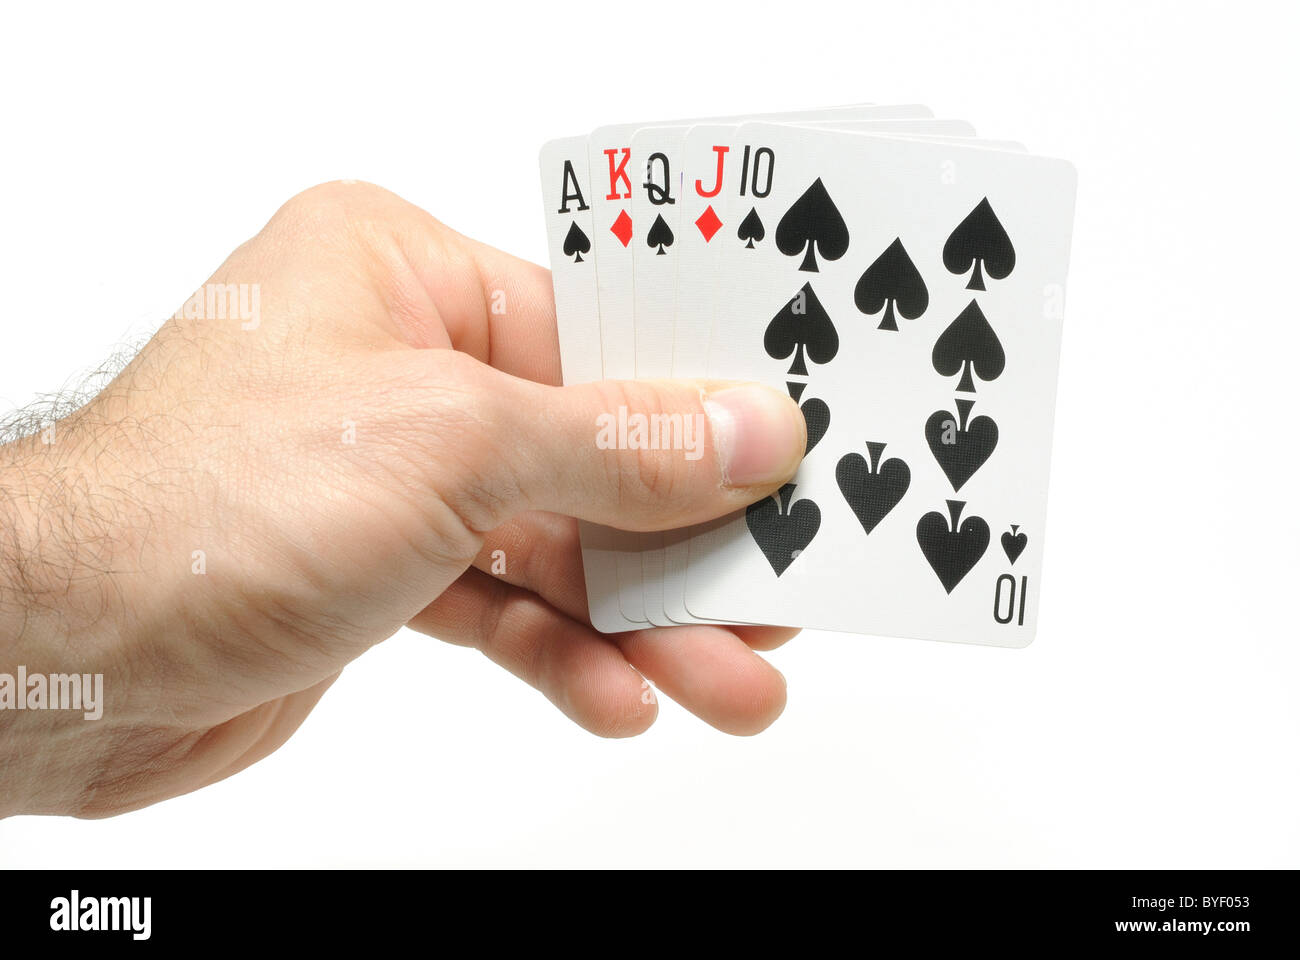 Full House in a hand isolated on a white background. Stock Photo